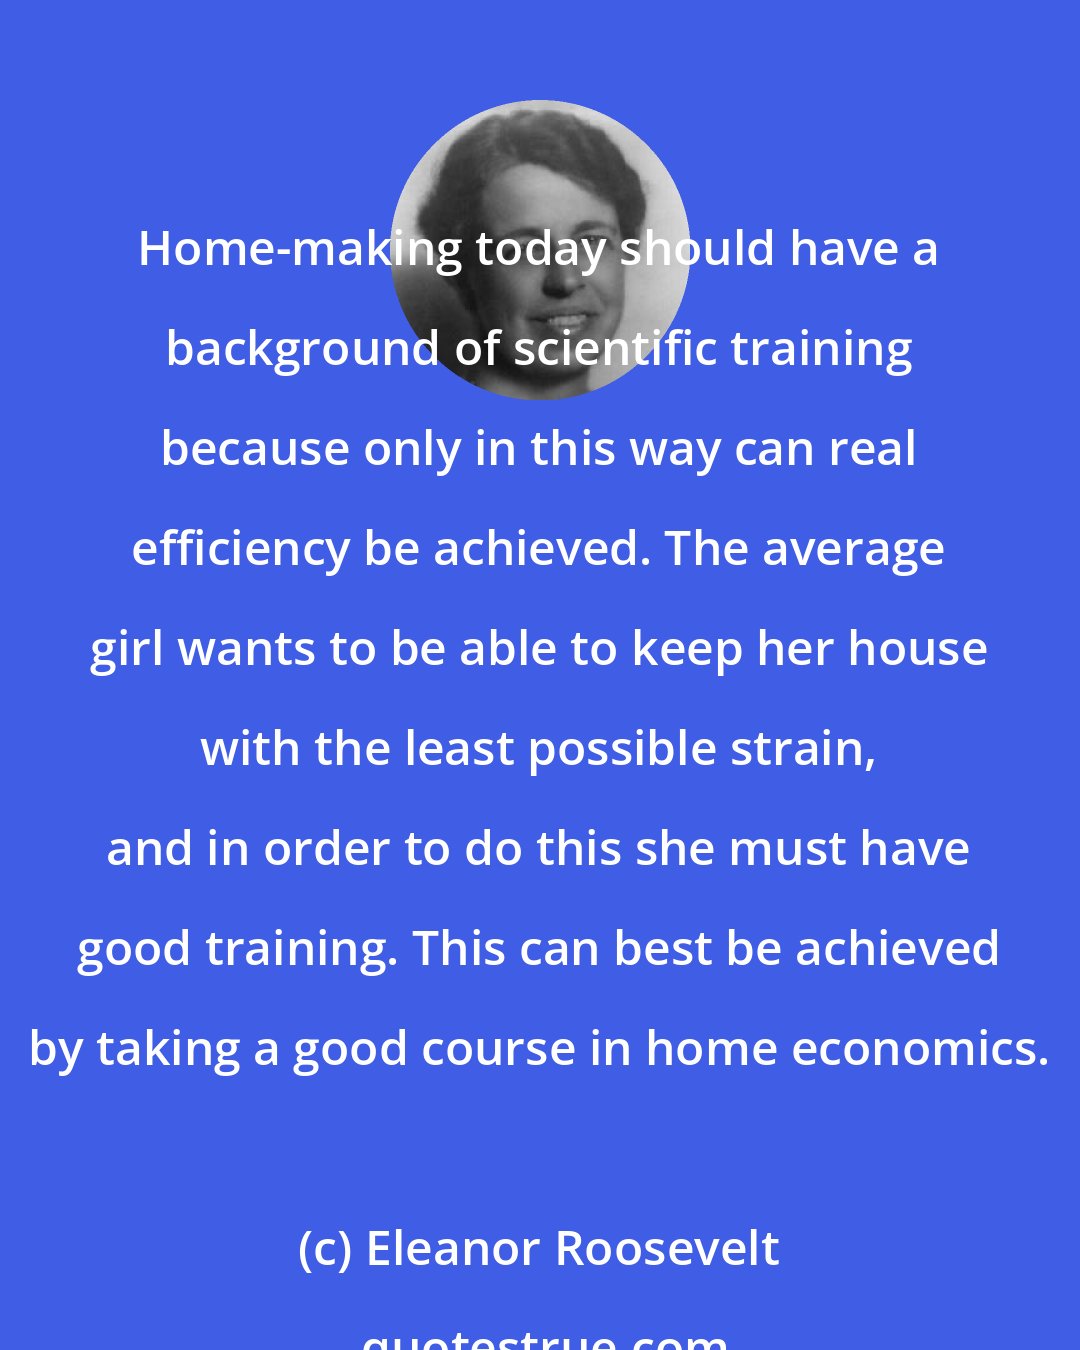 Eleanor Roosevelt: Home-making today should have a background of scientific training because only in this way can real efficiency be achieved. The average girl wants to be able to keep her house with the least possible strain, and in order to do this she must have good training. This can best be achieved by taking a good course in home economics.